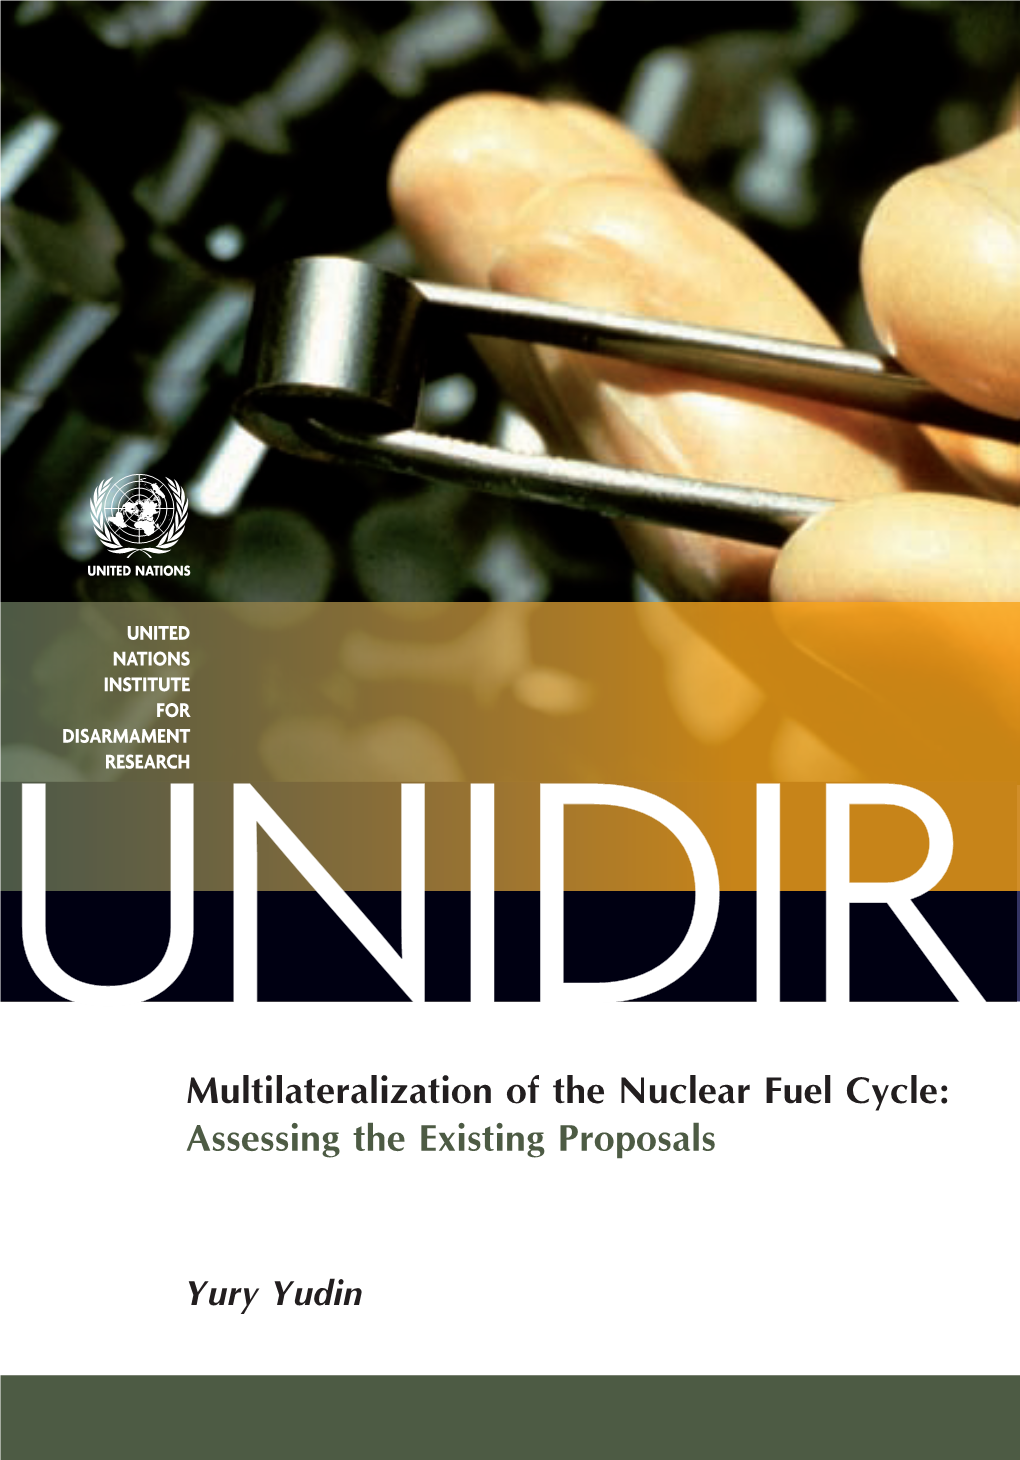 Multilateralization of the Nuclear Fuel Cycle: Assessing Existing Proposals